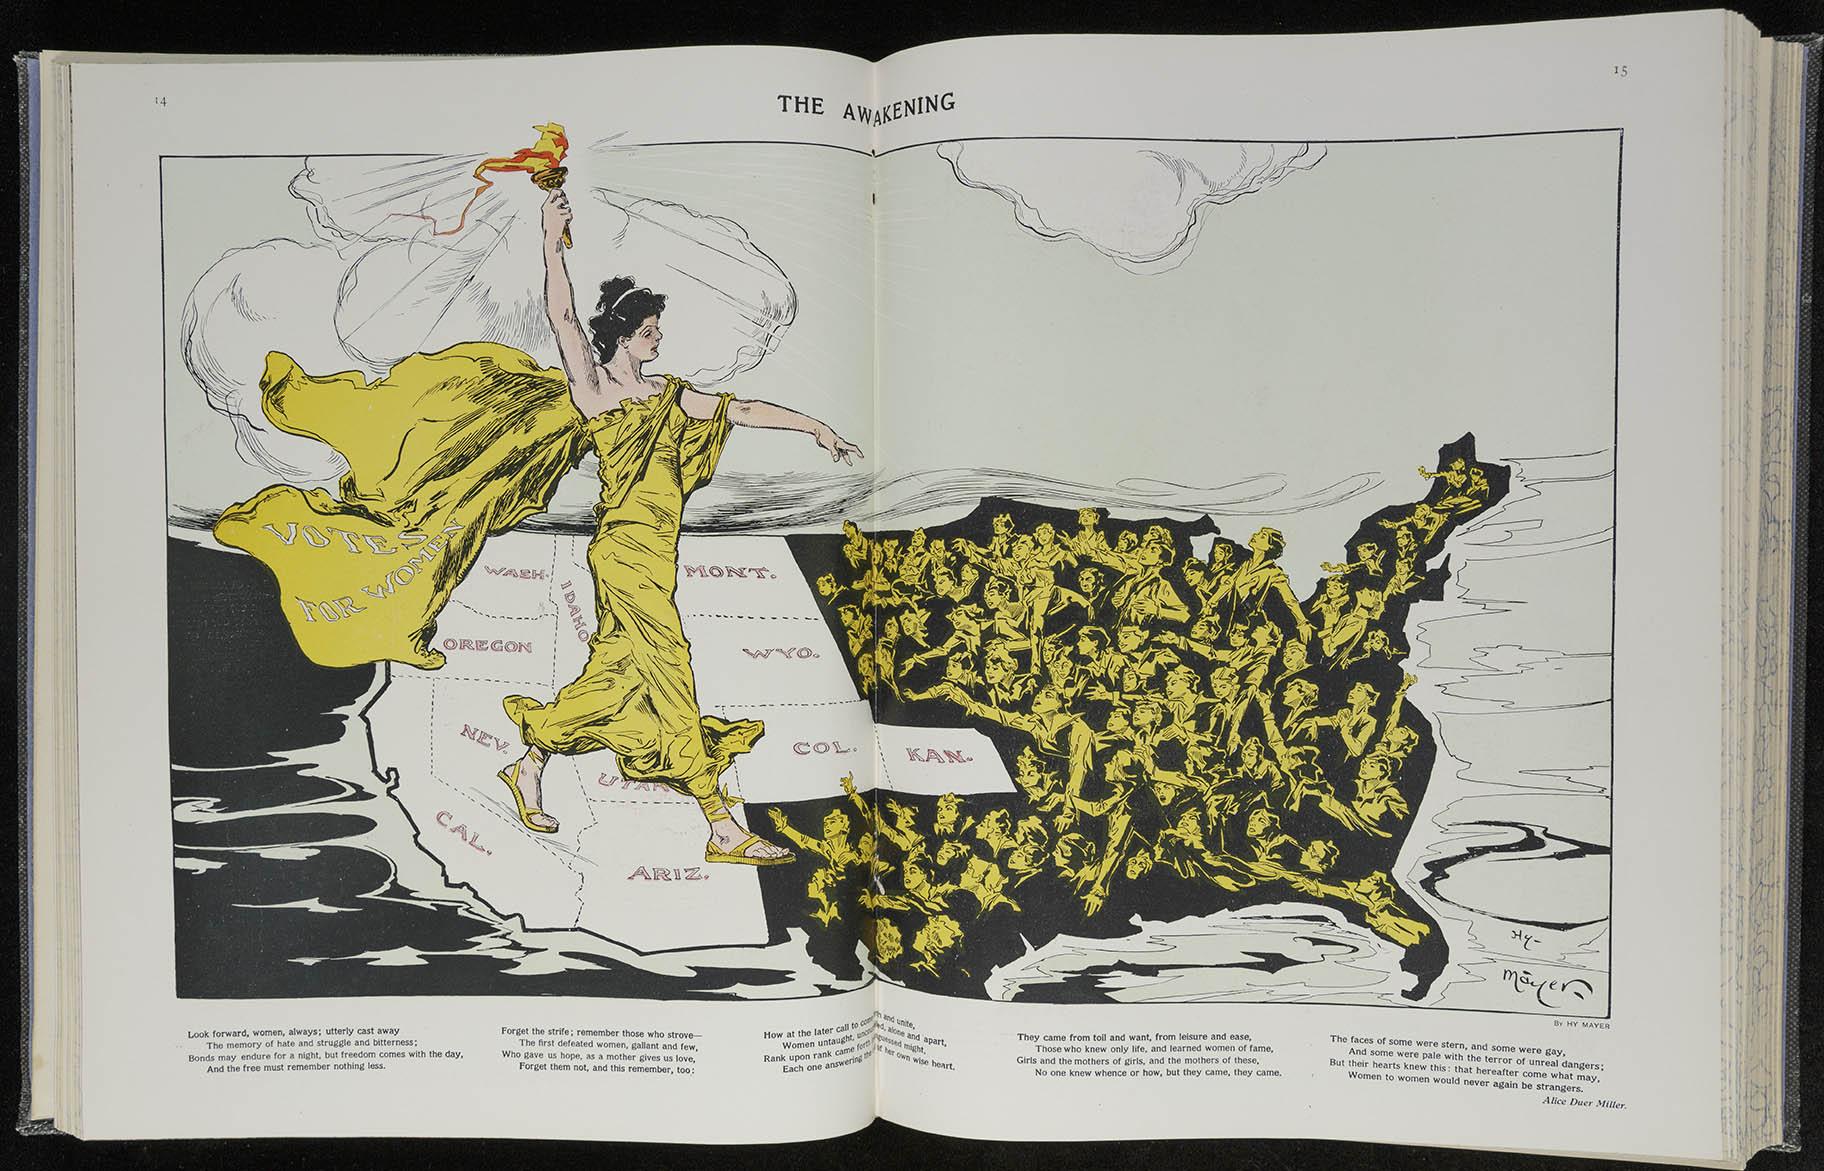 “The Awakening.” Puck. New York: Puck Publishing Company, 1915. As this illustration suggests, women’s suffrage extended gradually across the United States over decades before the 19th Amendment was ratified in August 1920. While many women voted in the presidential election that year, access to the ballot box remained limited for women of color, immigrant women, and Indigenous women.